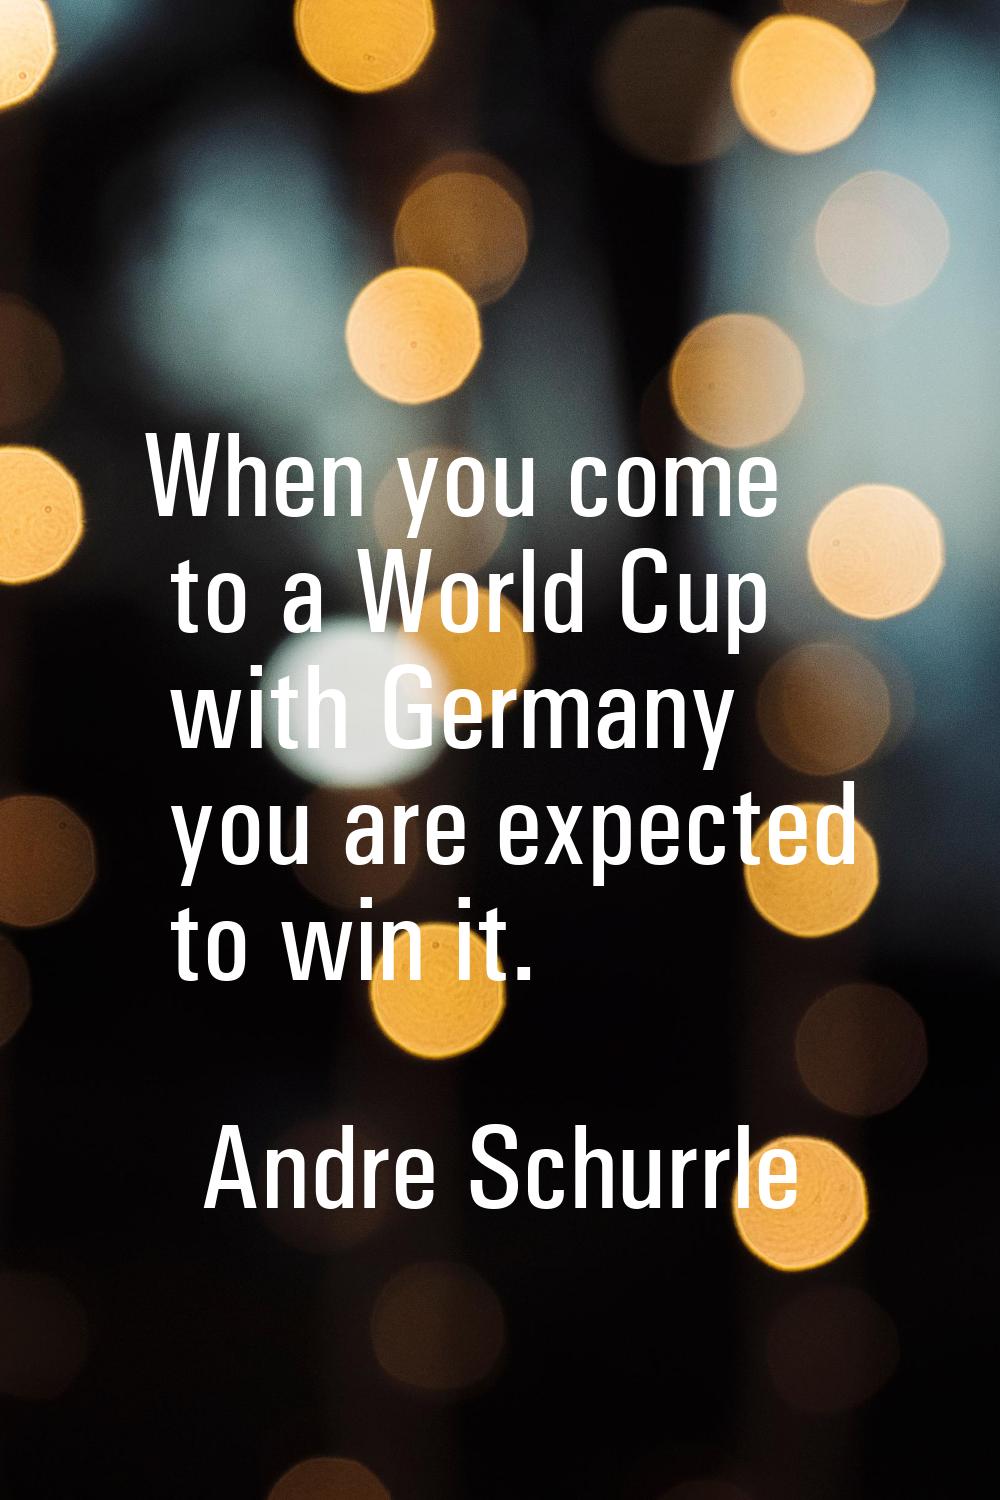 When you come to a World Cup with Germany you are expected to win it.